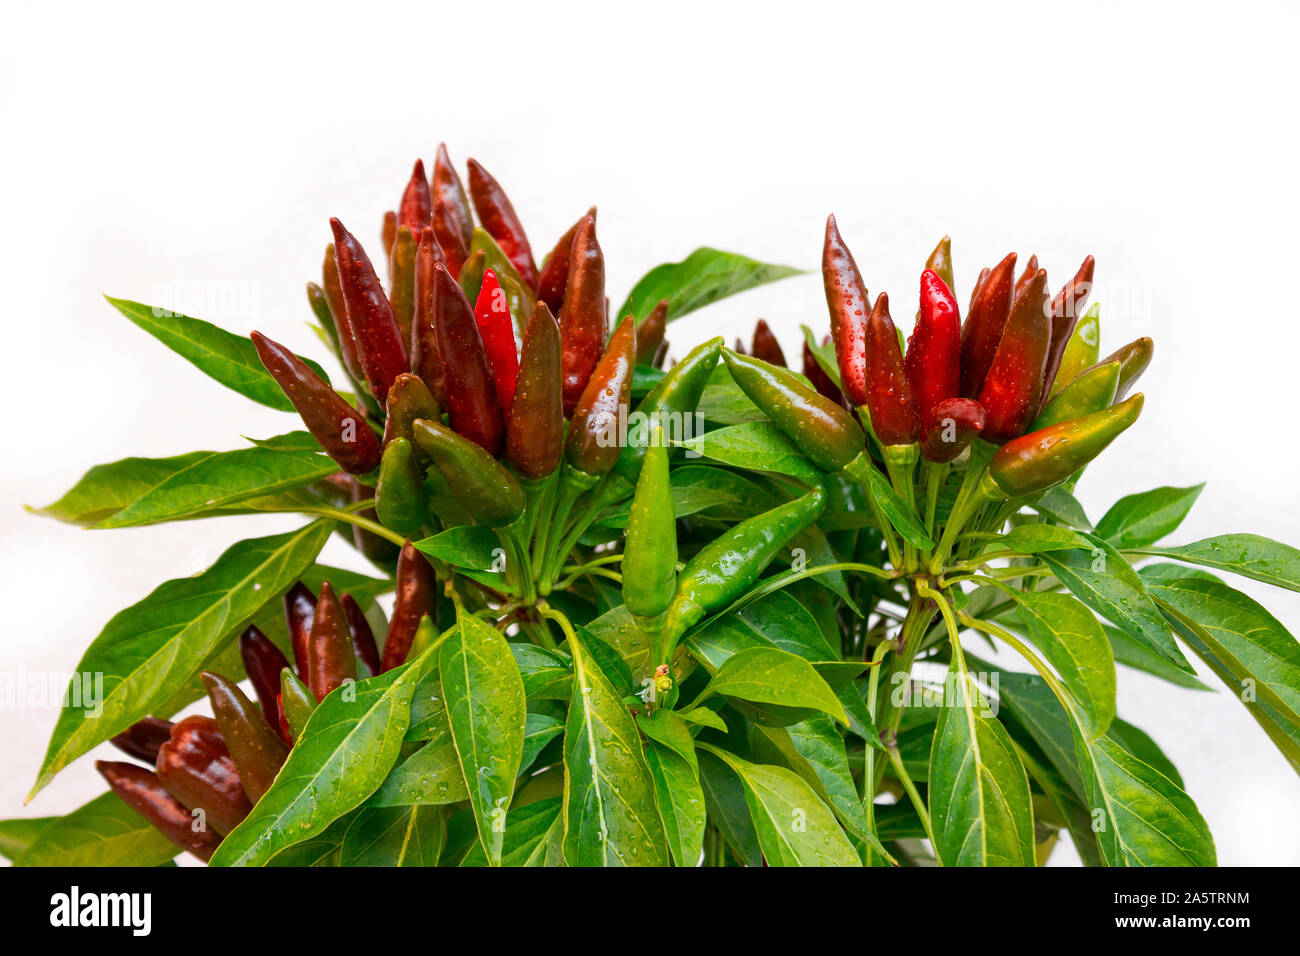 Chili pepper saltillo (Capsicum annum) plant, with lots of chilis. Ripe and unripe peppers on plant. Green, orange and red chilis. White background. Stock Photo